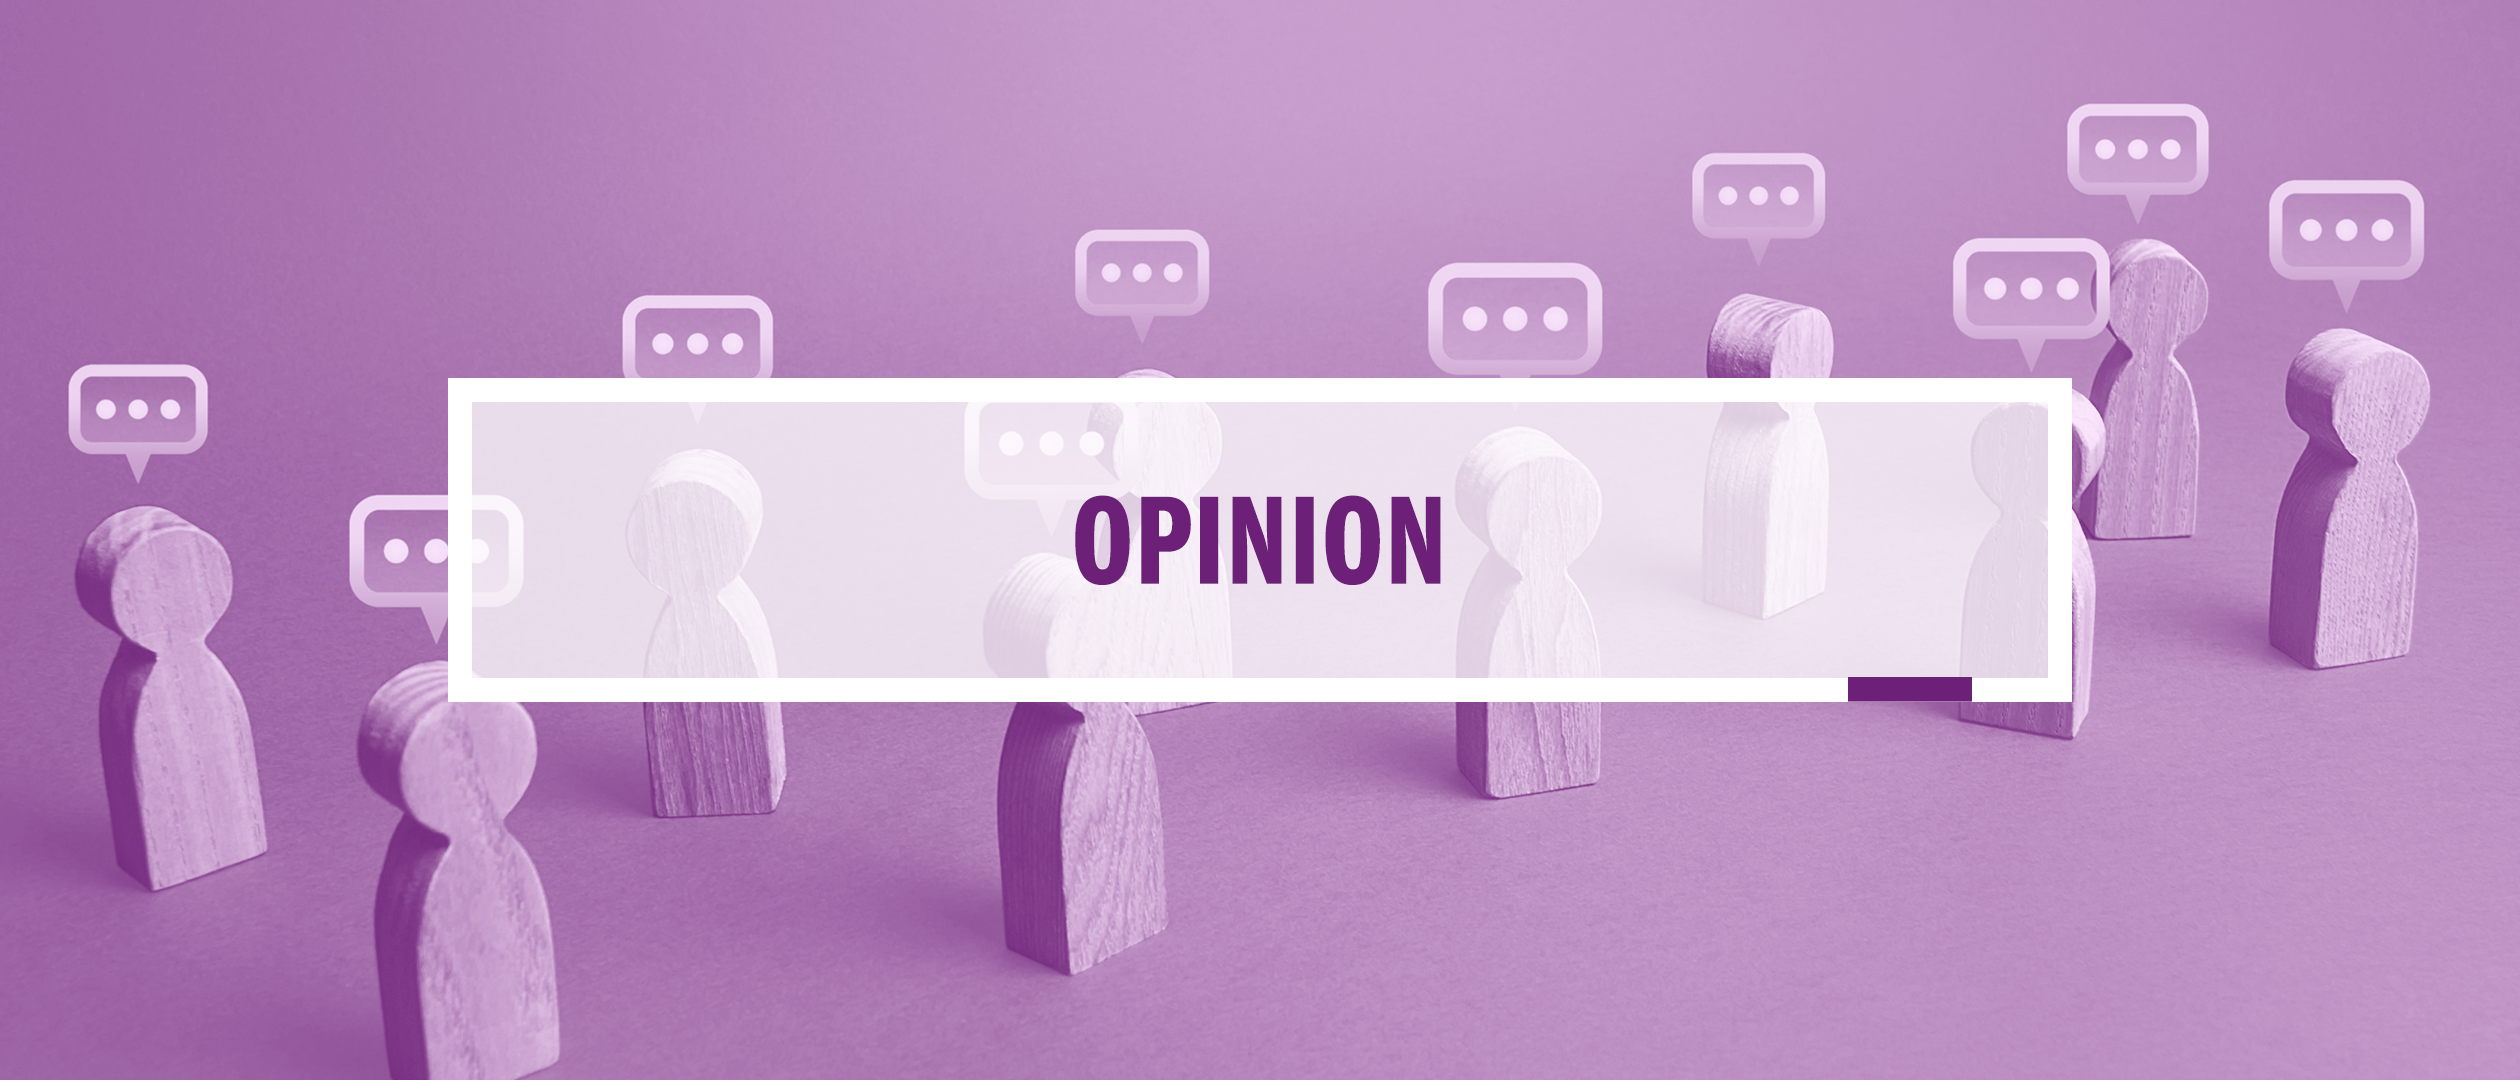 A dark-lavender image of 10 wooden pegs, roughly shaped like humans, with speech bubbles suspended above their heads, surmounted by a semi-opaque white box containing the word "Opinion"